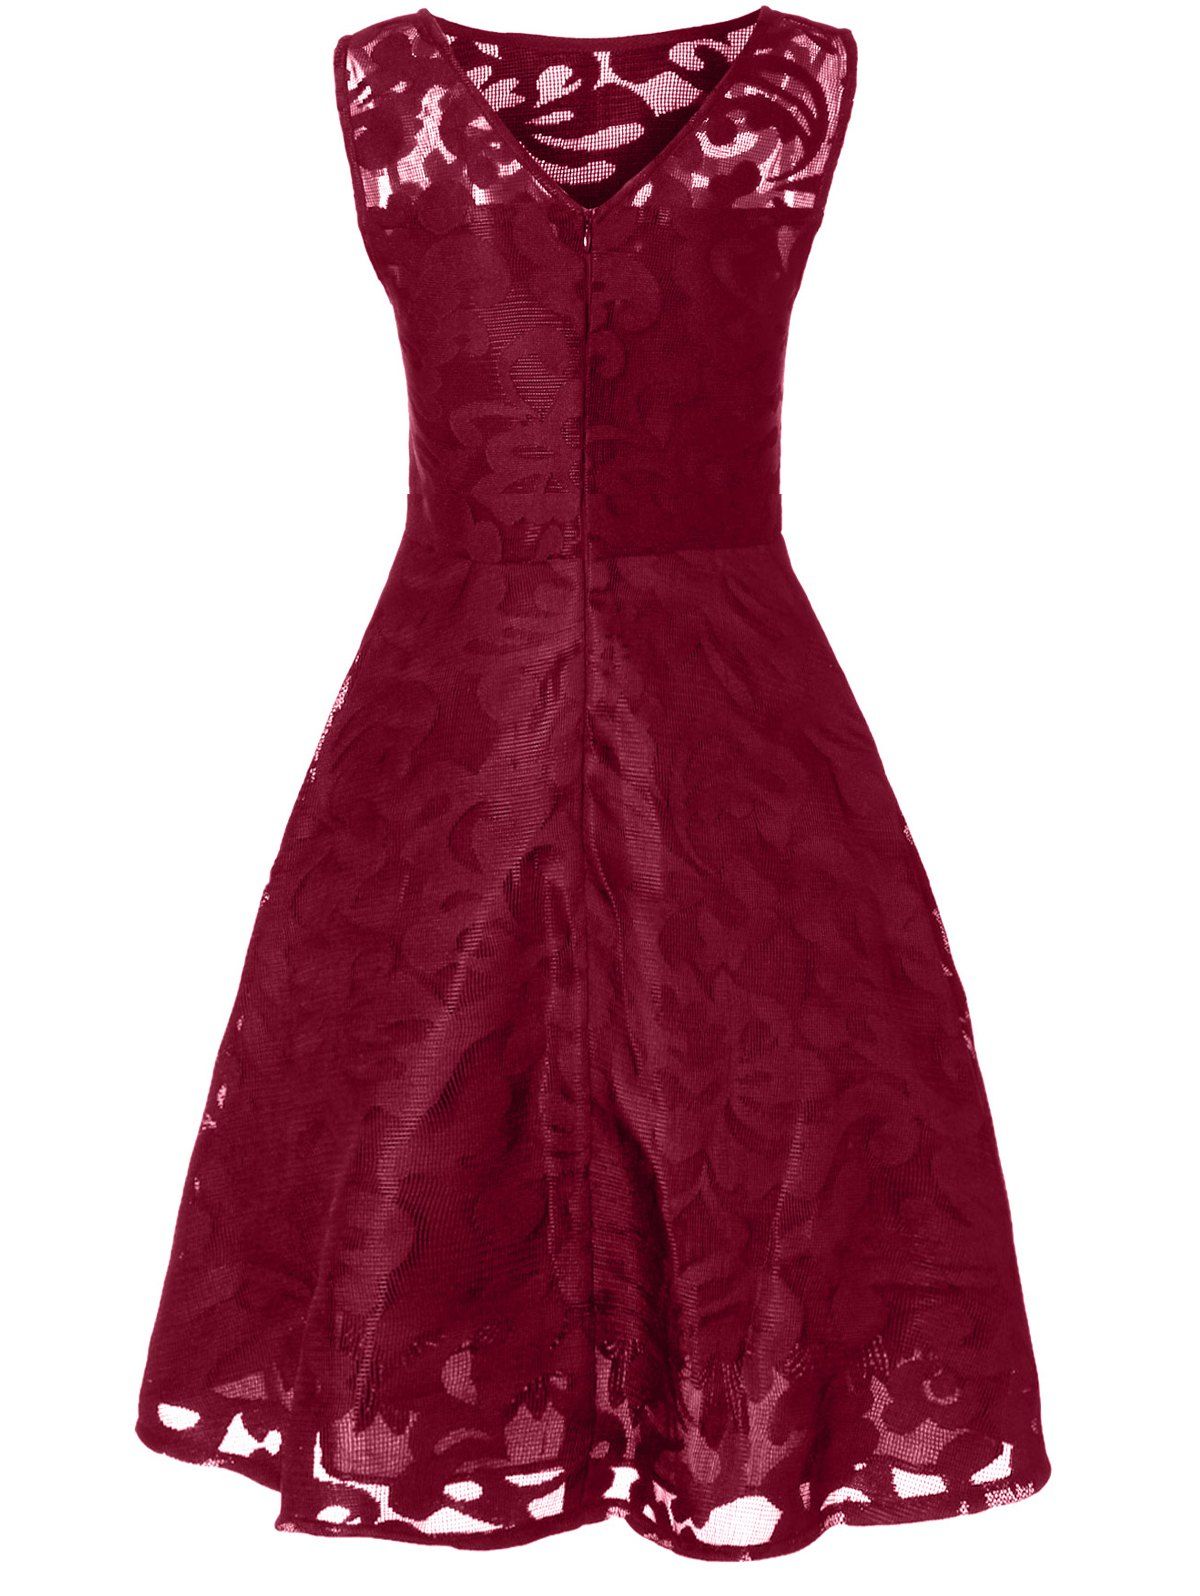 2018 Lace Plus Size Holiday Short Cocktail Dress BURGUNDY XL In Vintage ...